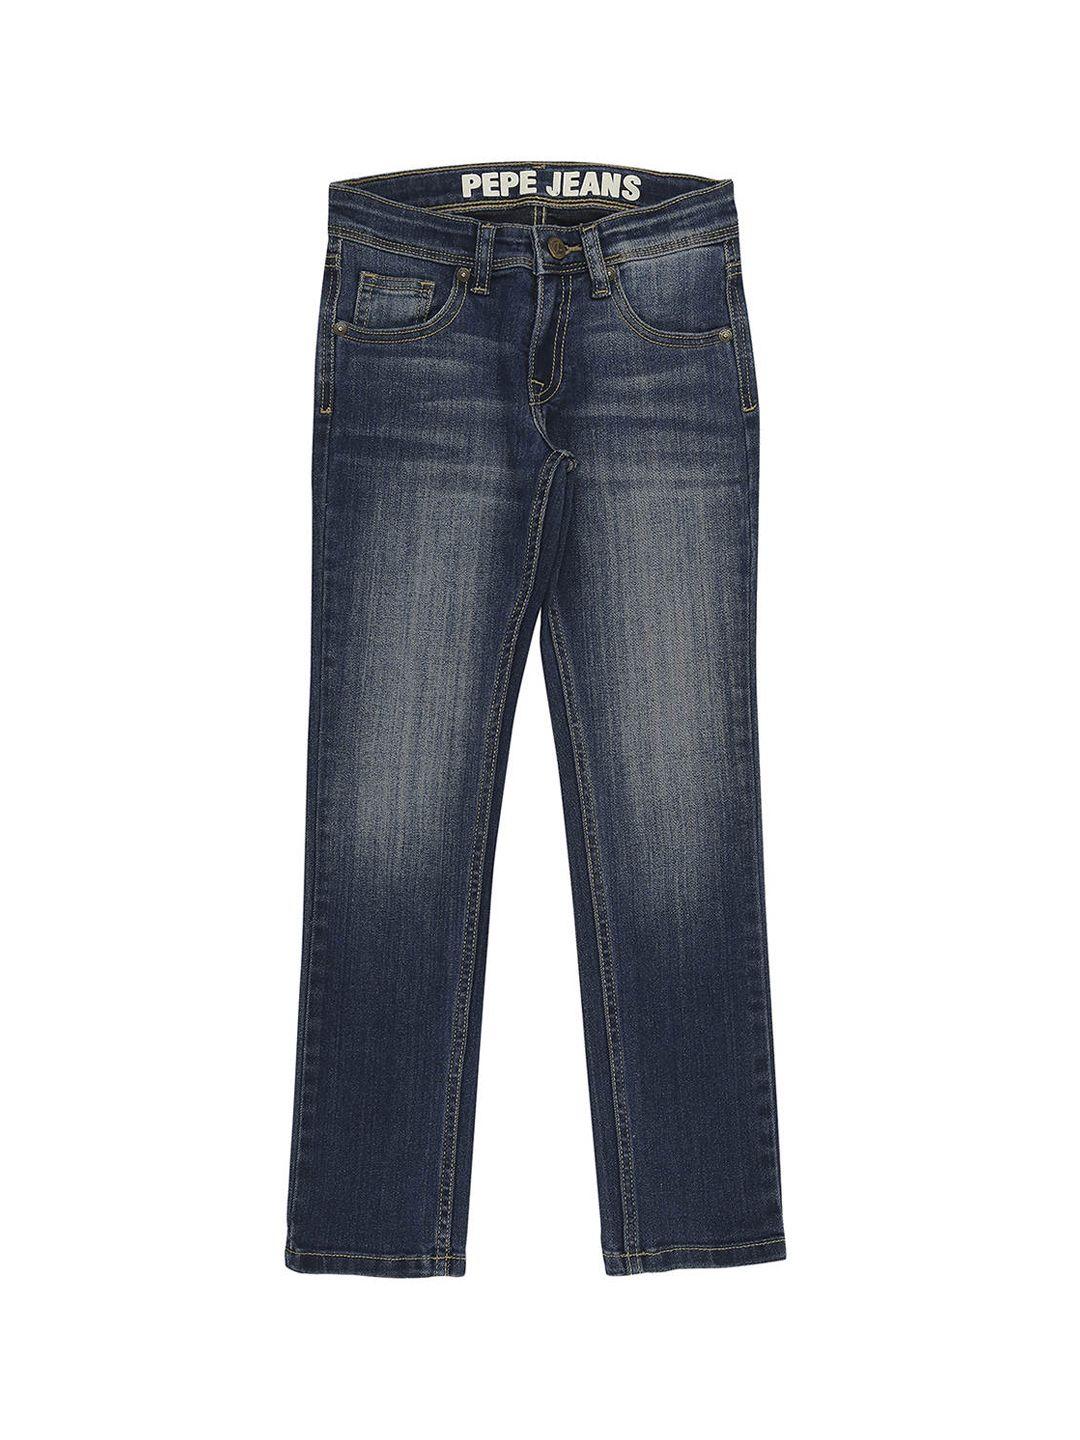 pepe jeans boys blue slim fit light fade stretchable jeans